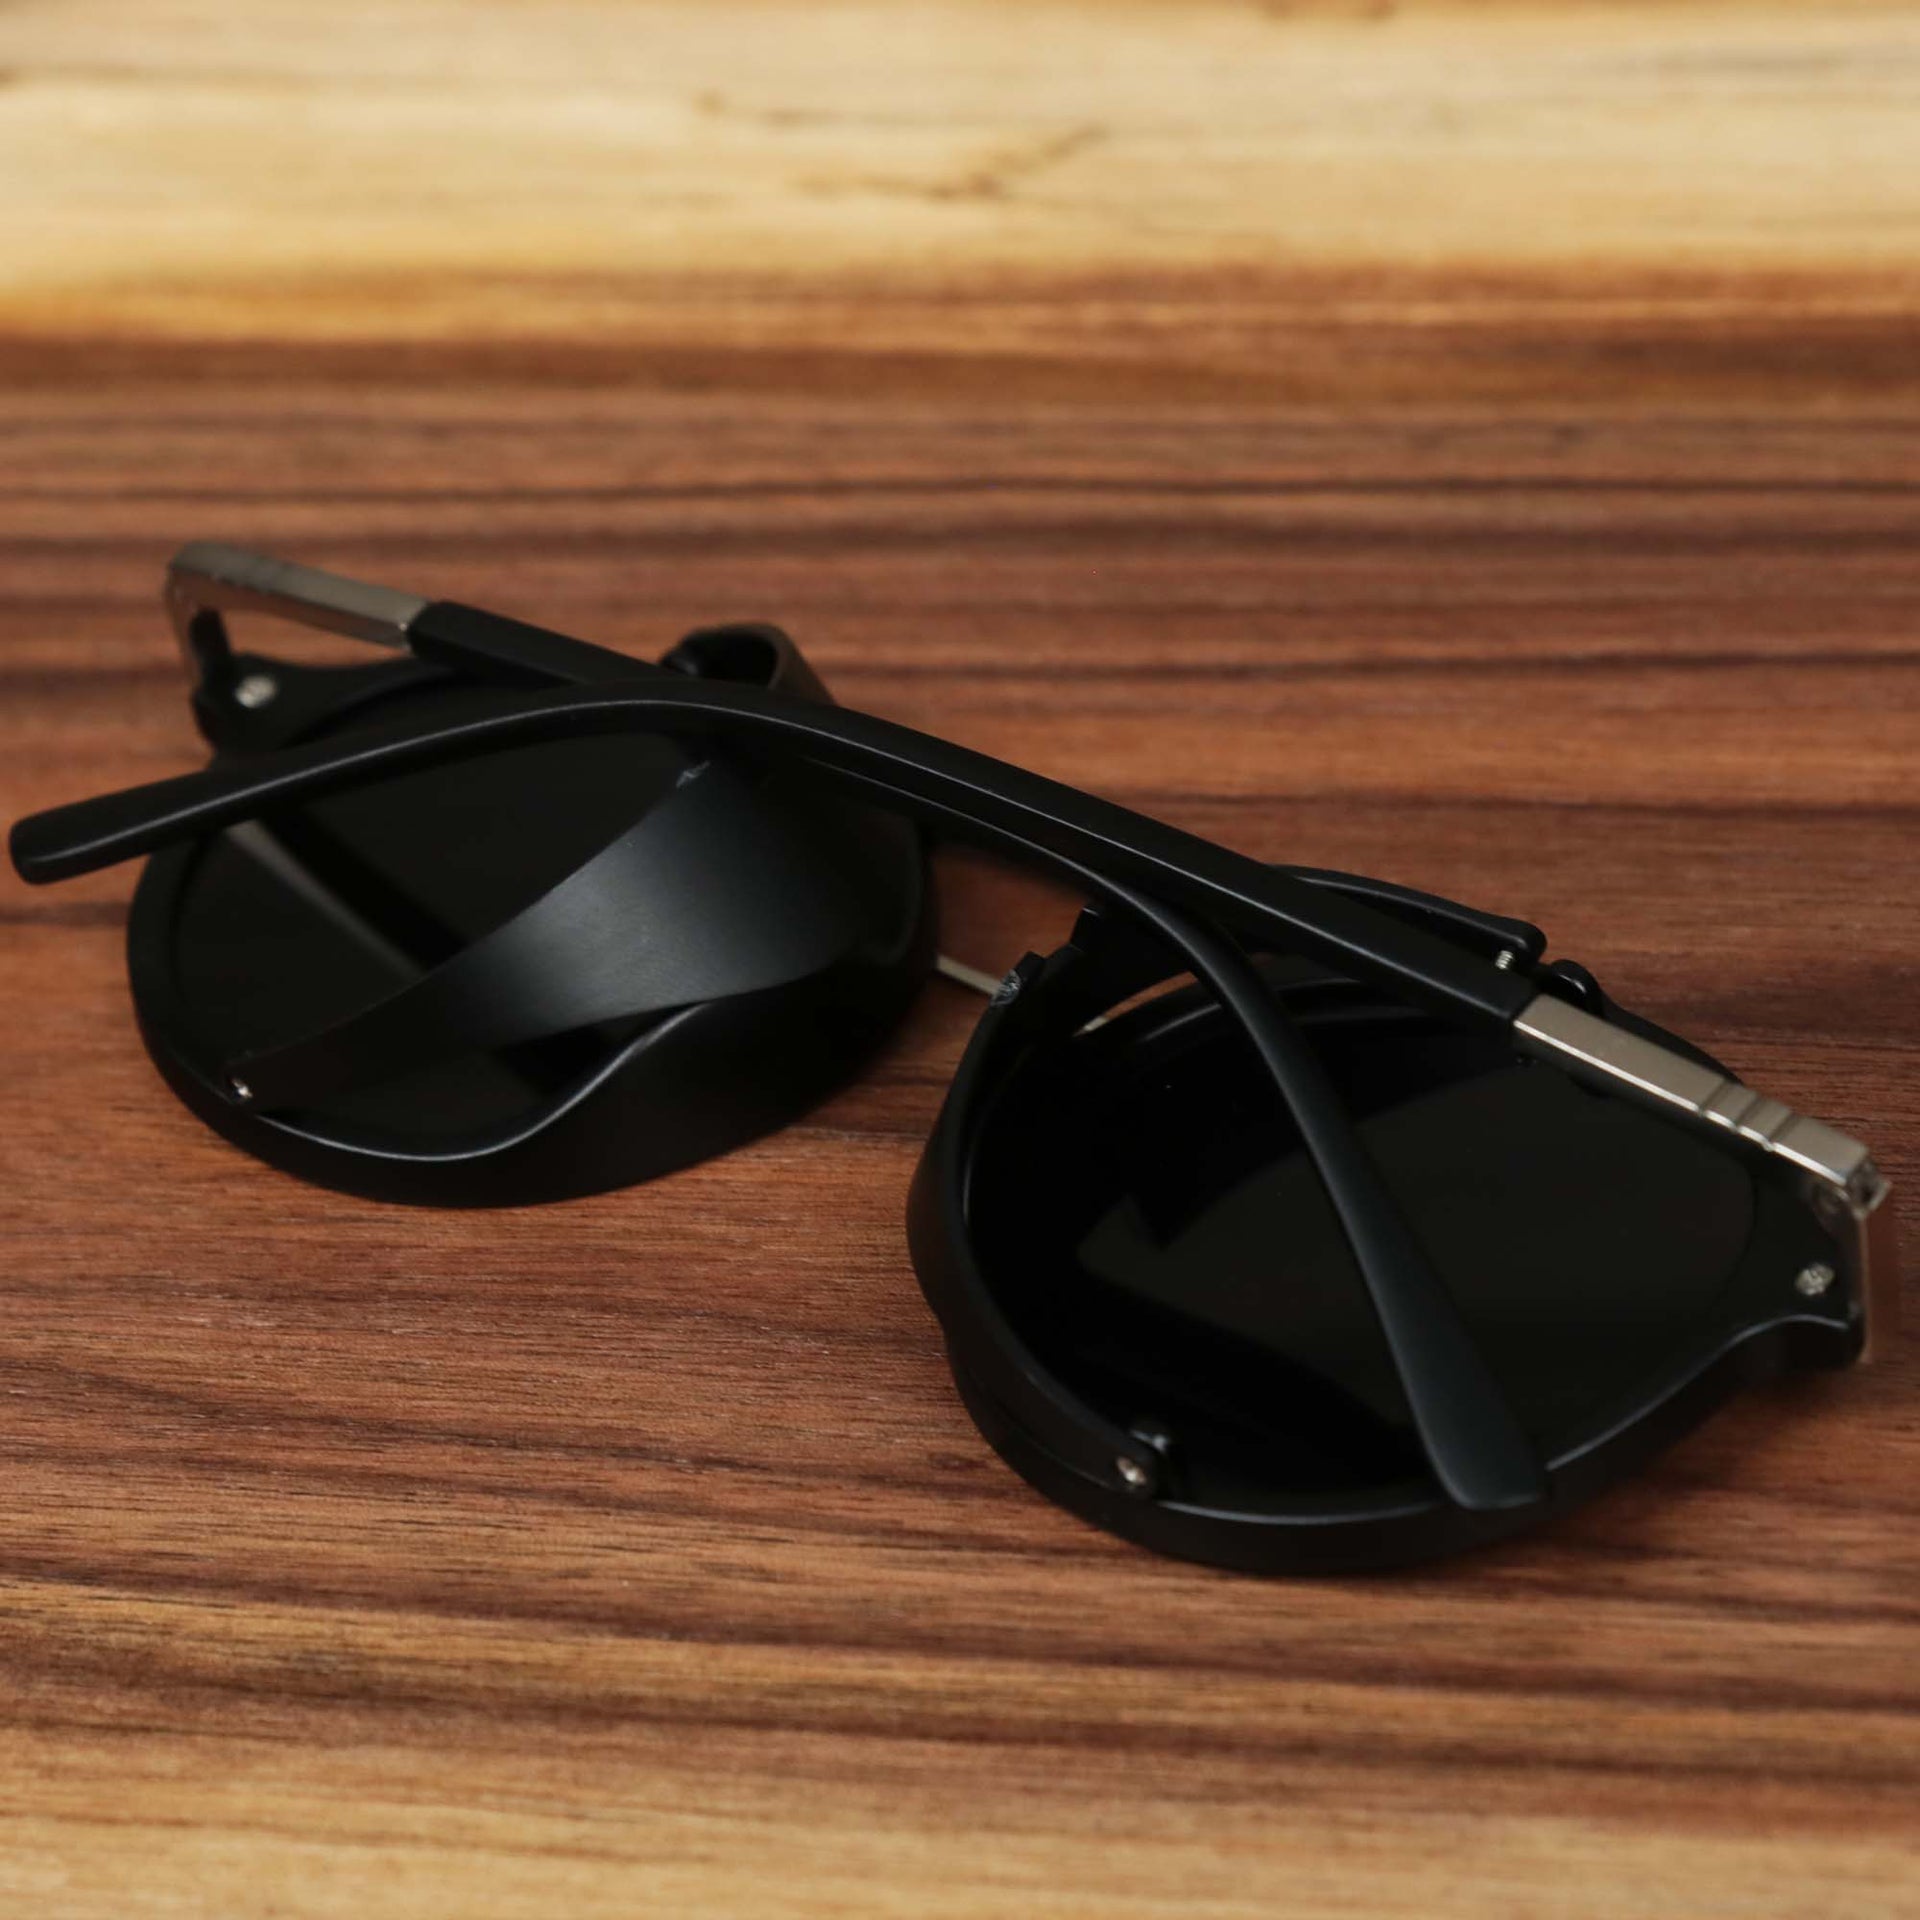 The Steampunk Frames Black Lens Sunglasses with Black Frame foded up